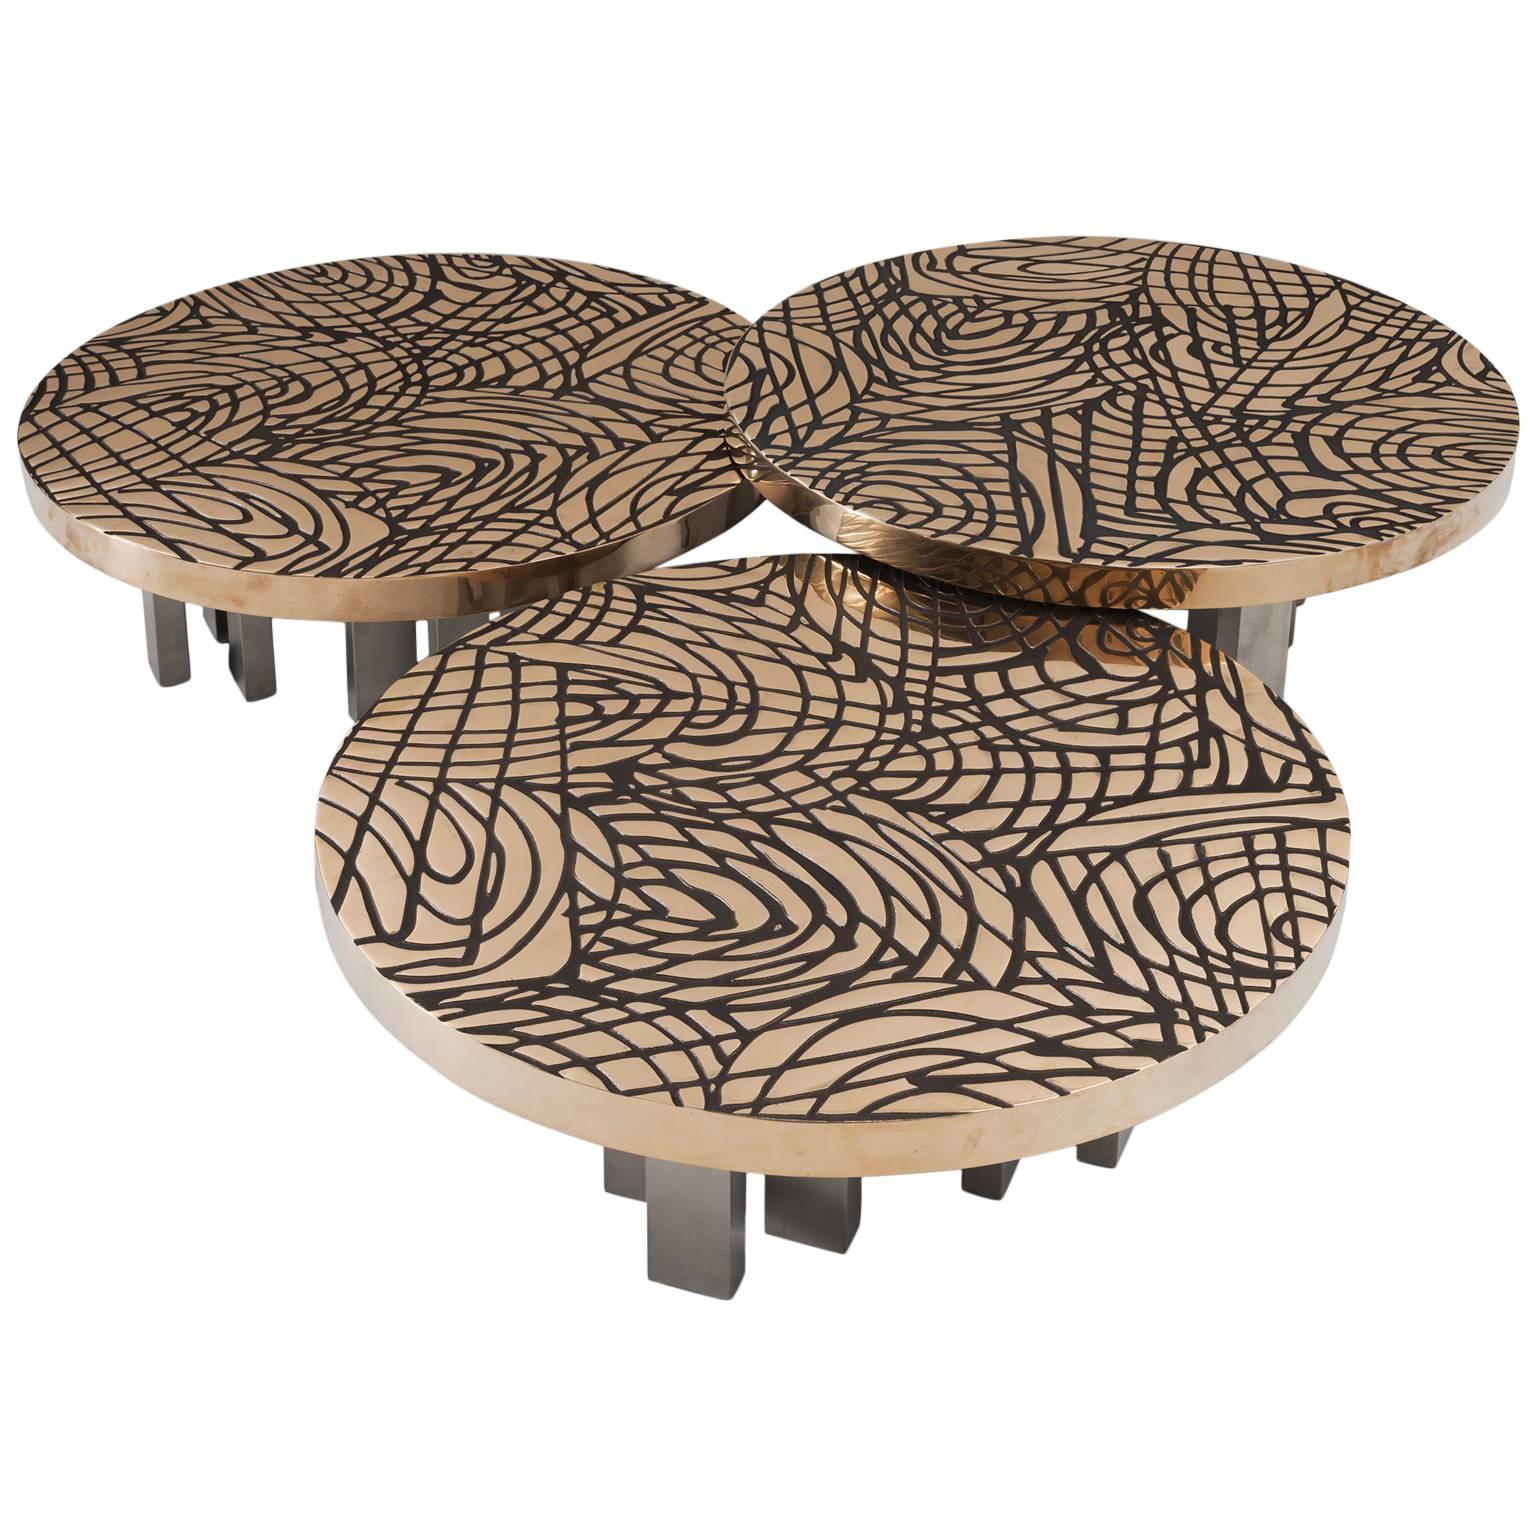 Set of Three Sculptural Bronze Coffee Tables by Inform